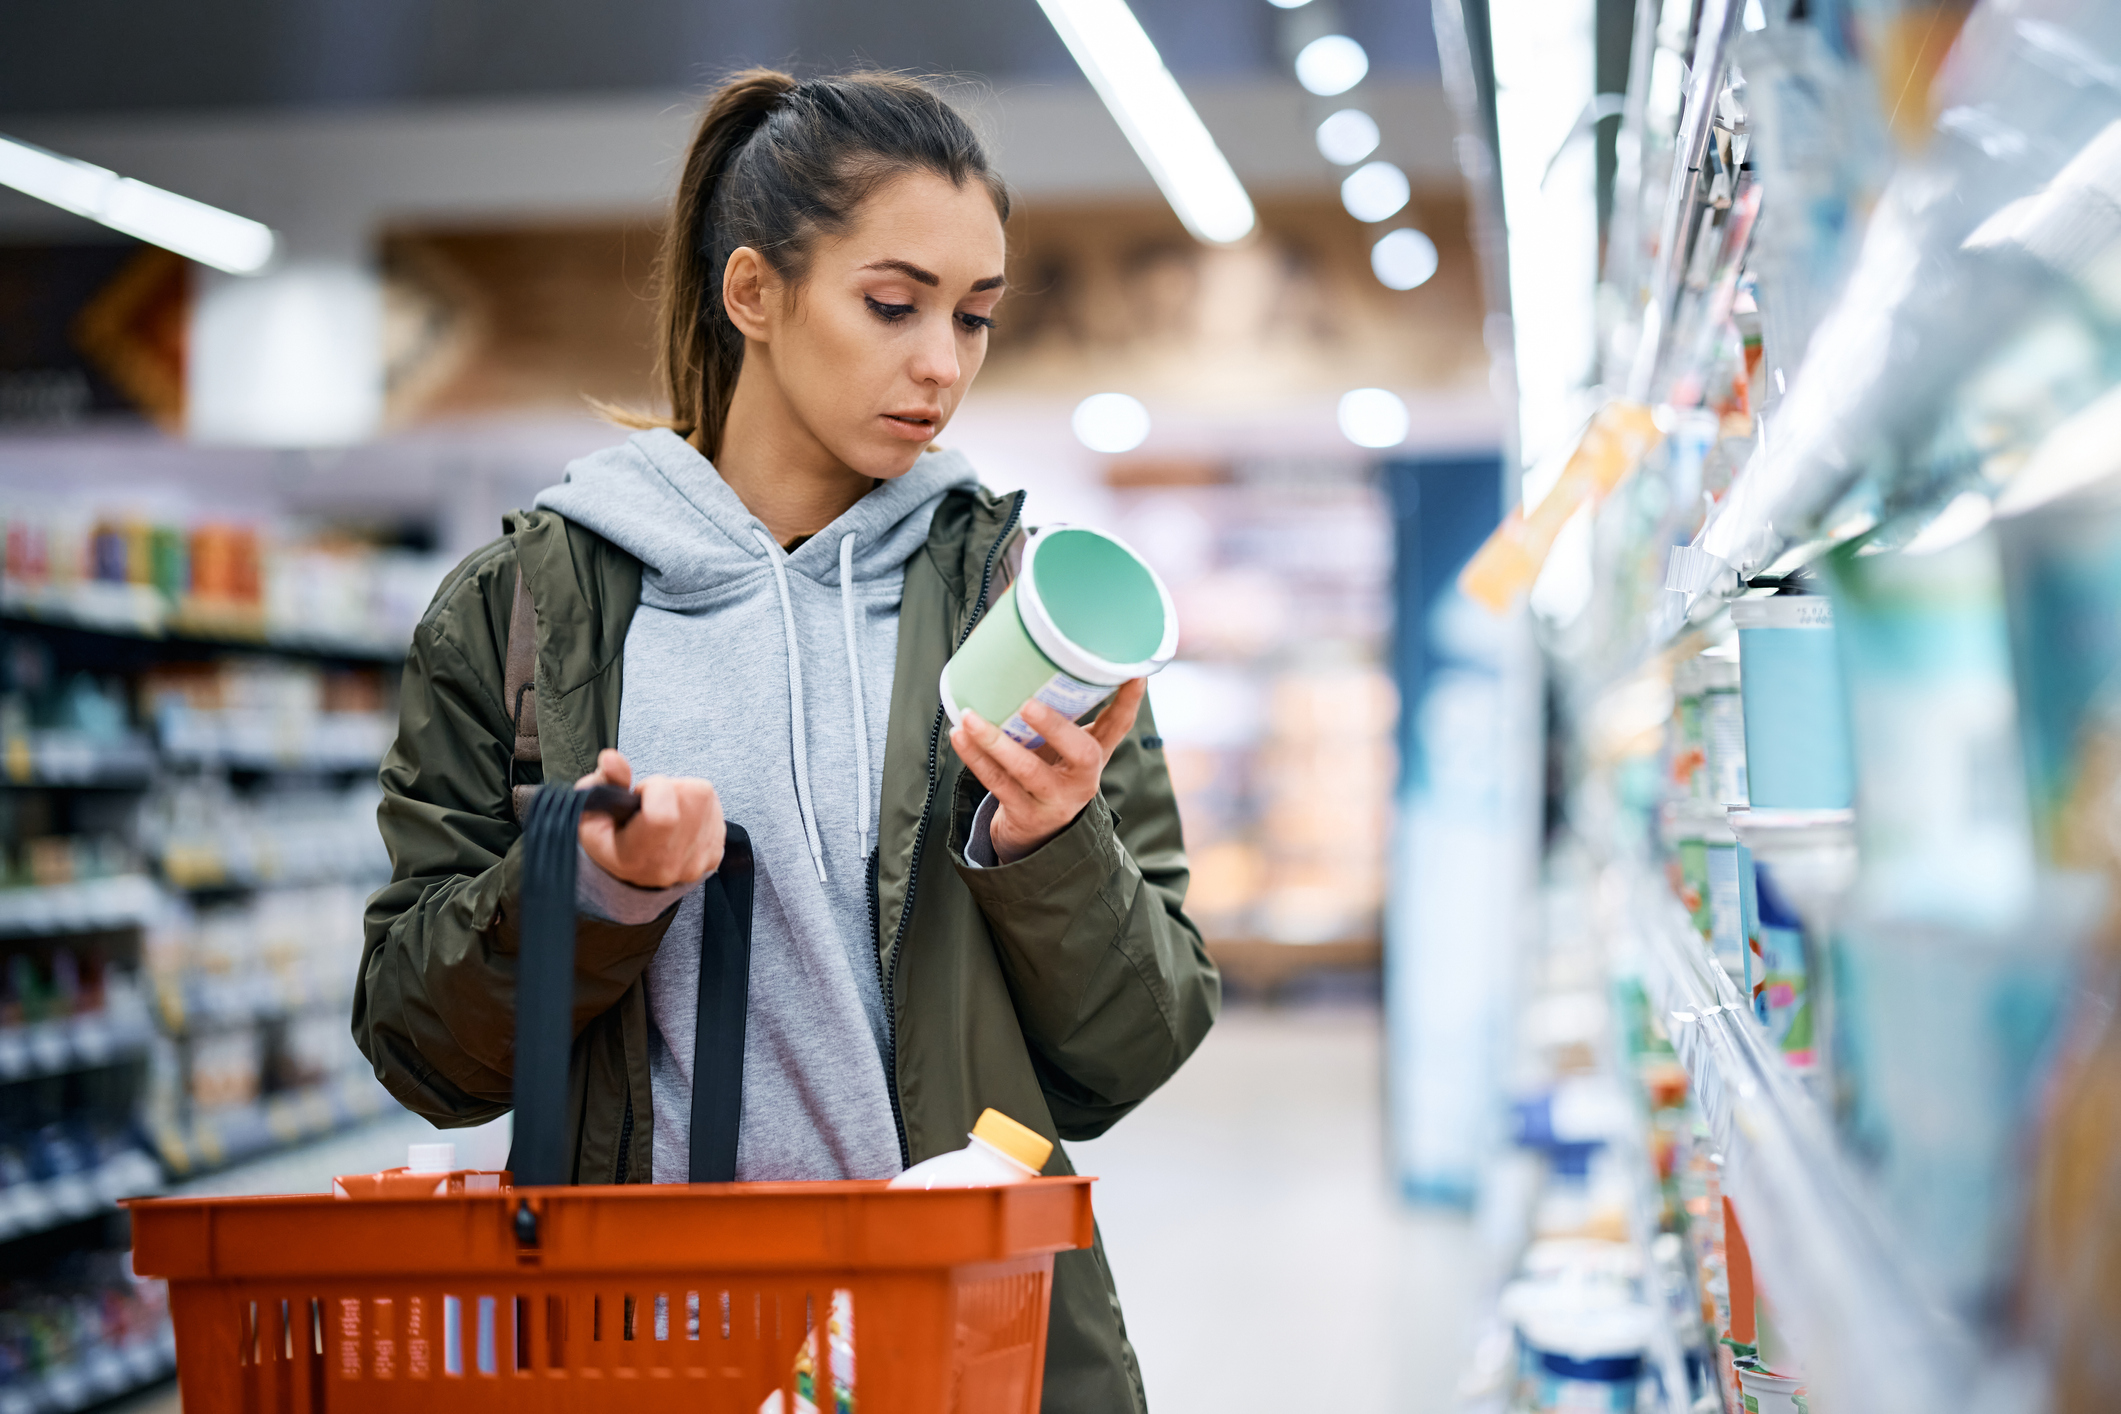 A fare skinned young woman holding a grocery basket and wearing a grey hoodie with a hunter green jacket reads a nutrition label while buying a product in the supermarket.